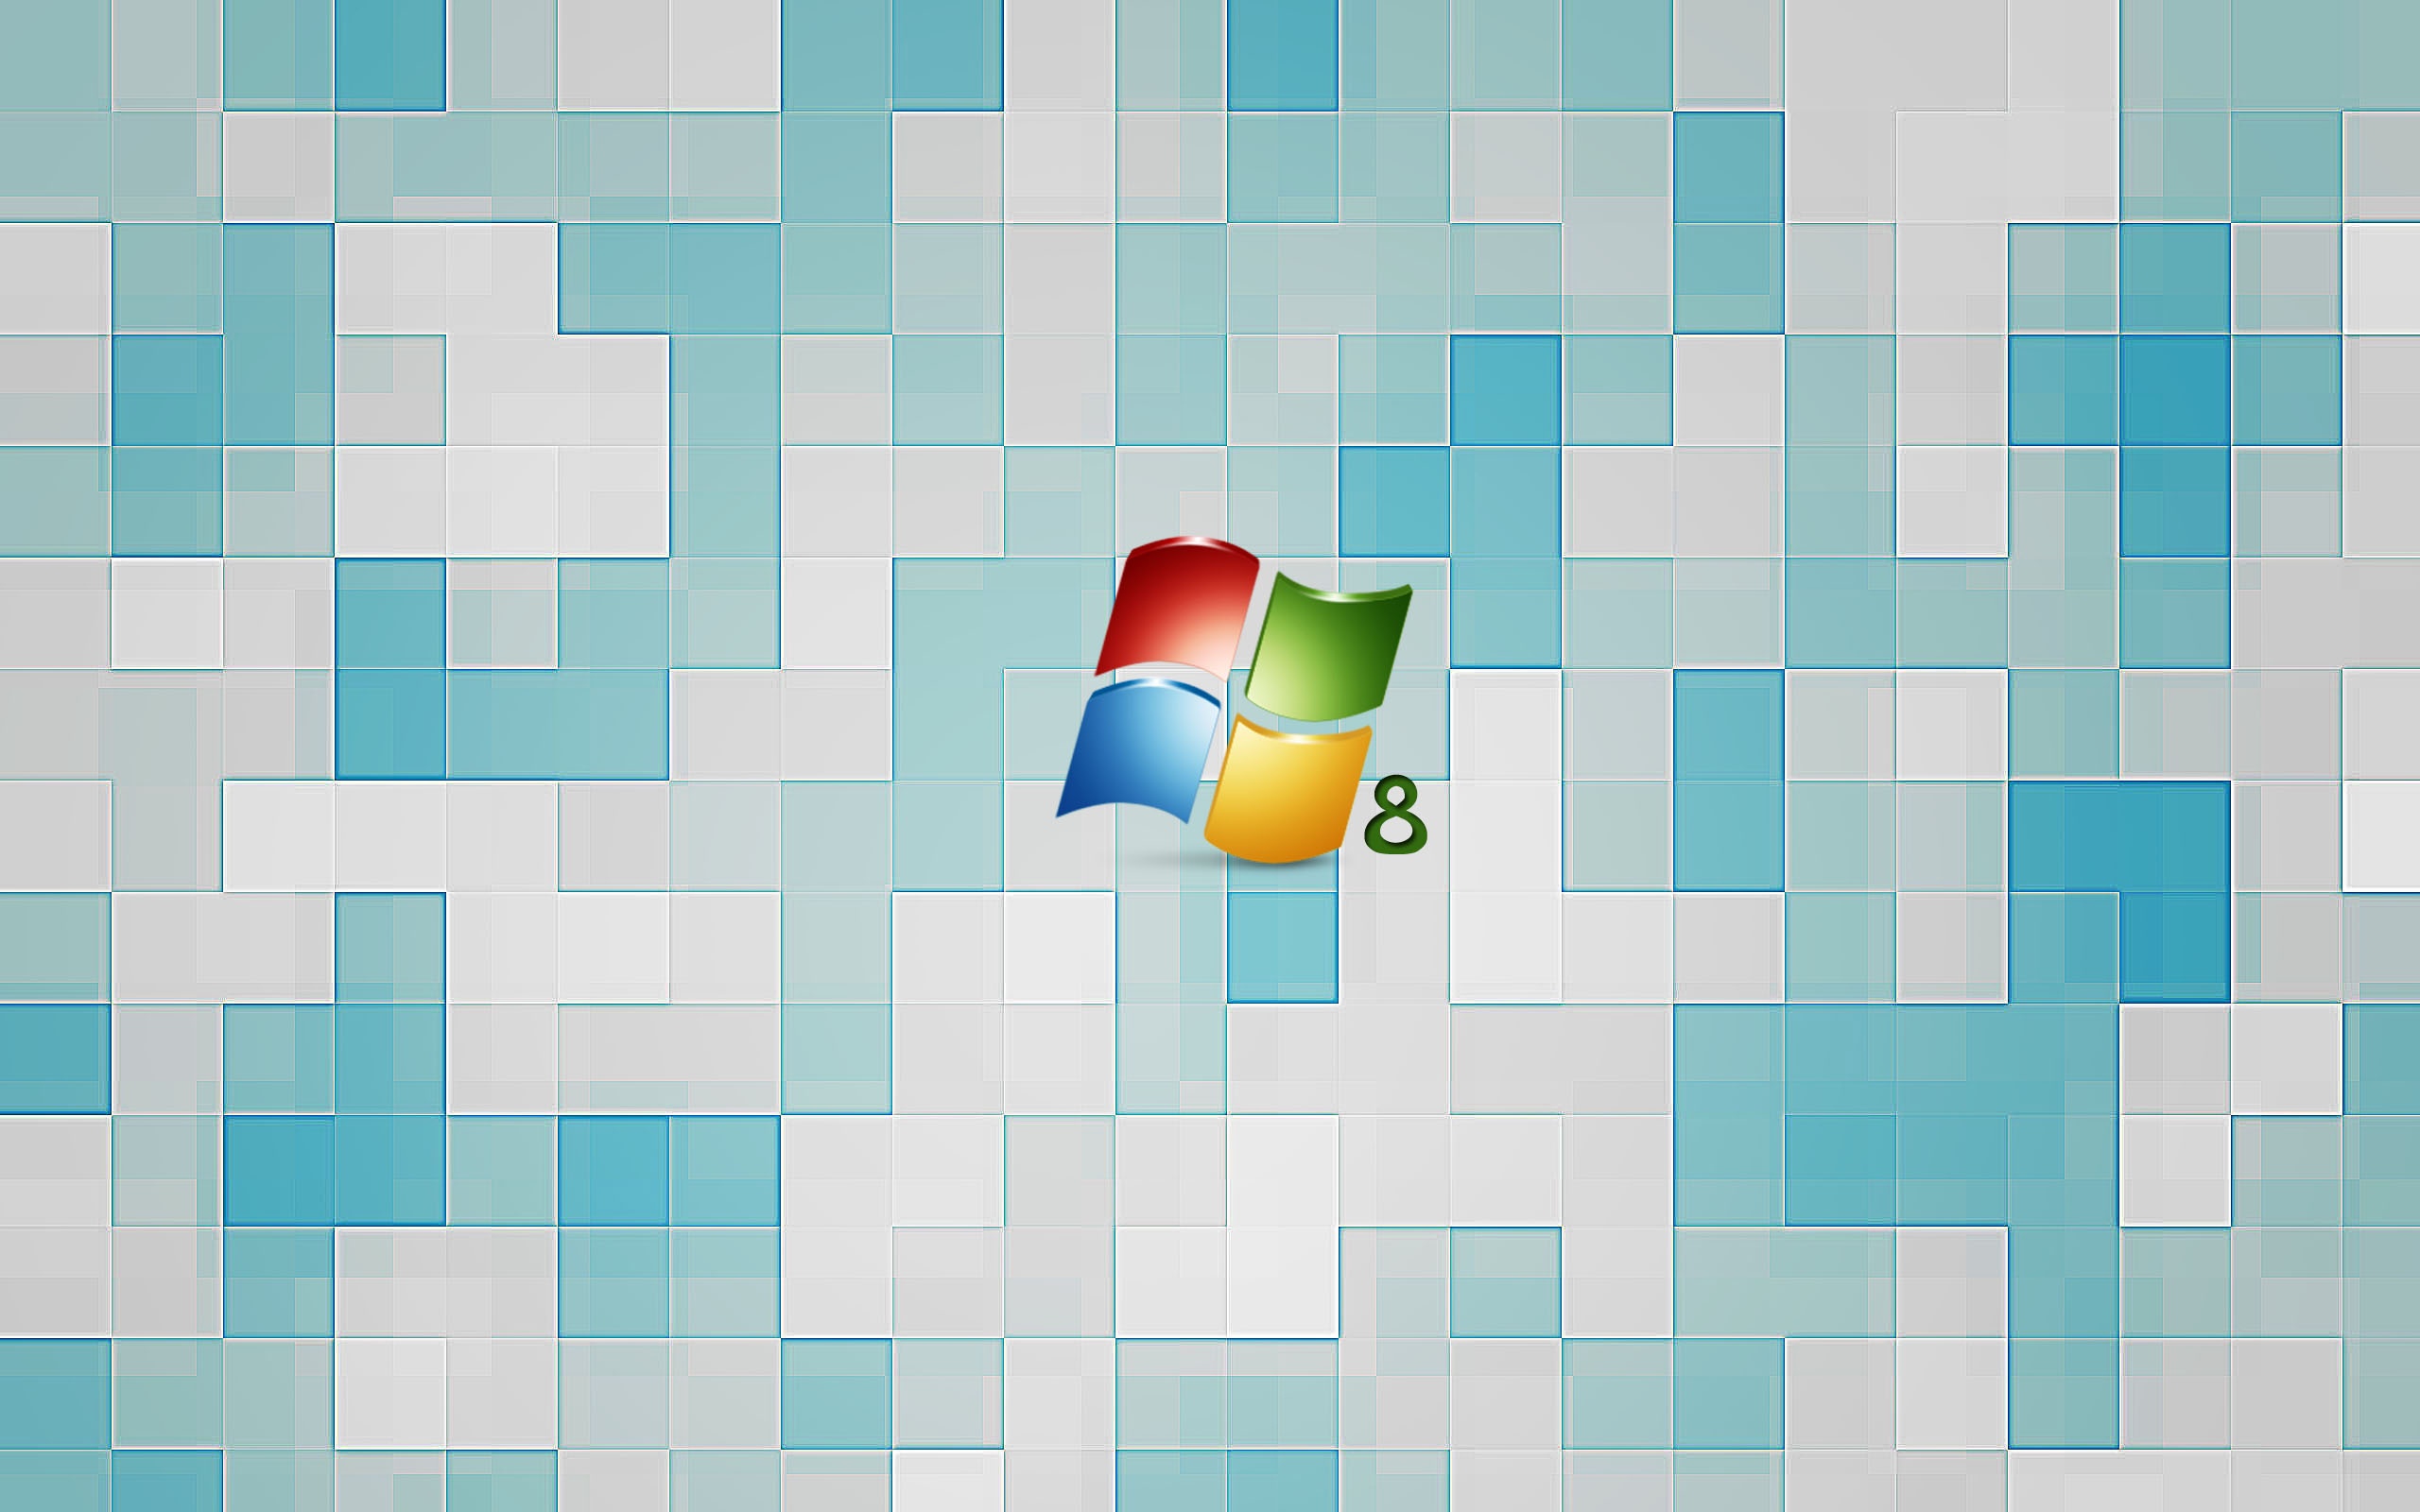 Windows 8 Theme wallpapers and images - wallpapers, pictures, photos